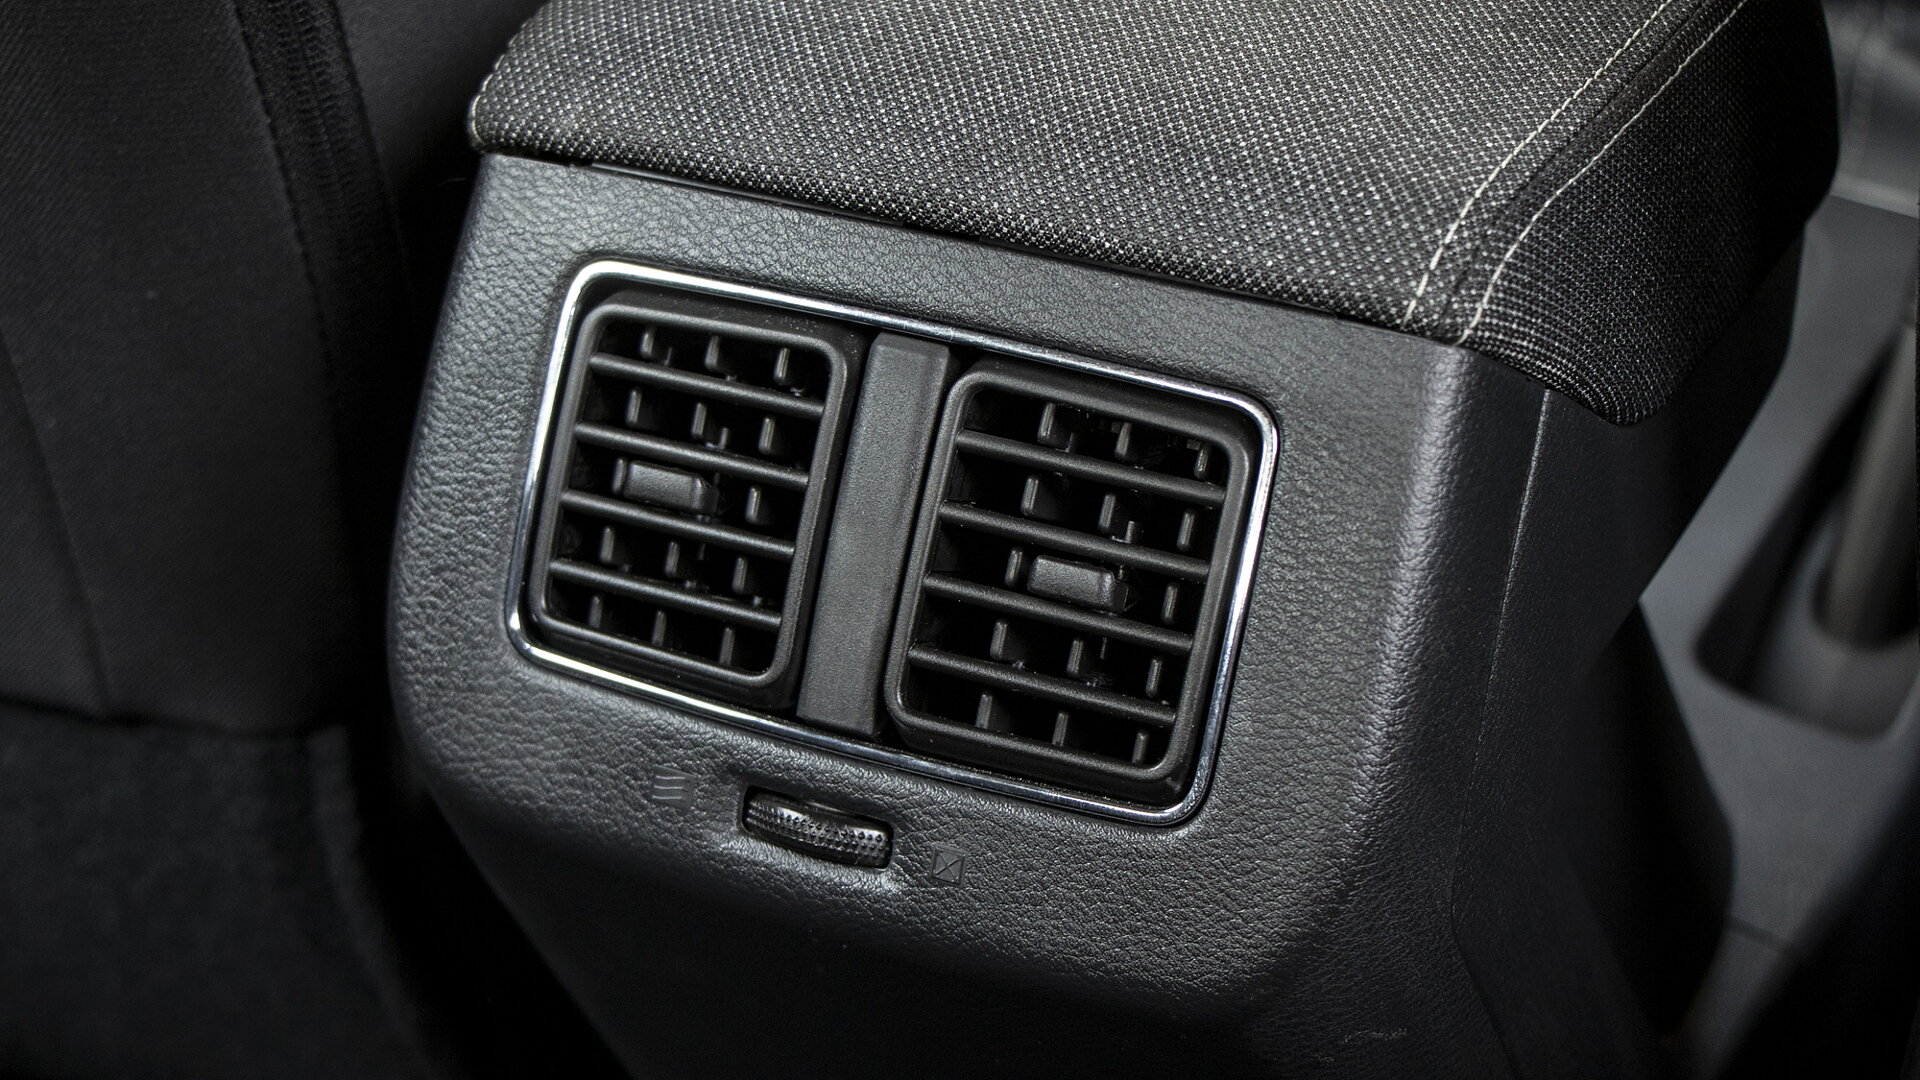 Magnite Rear Row Air Vent Image, Magnite Photos in India CarWale